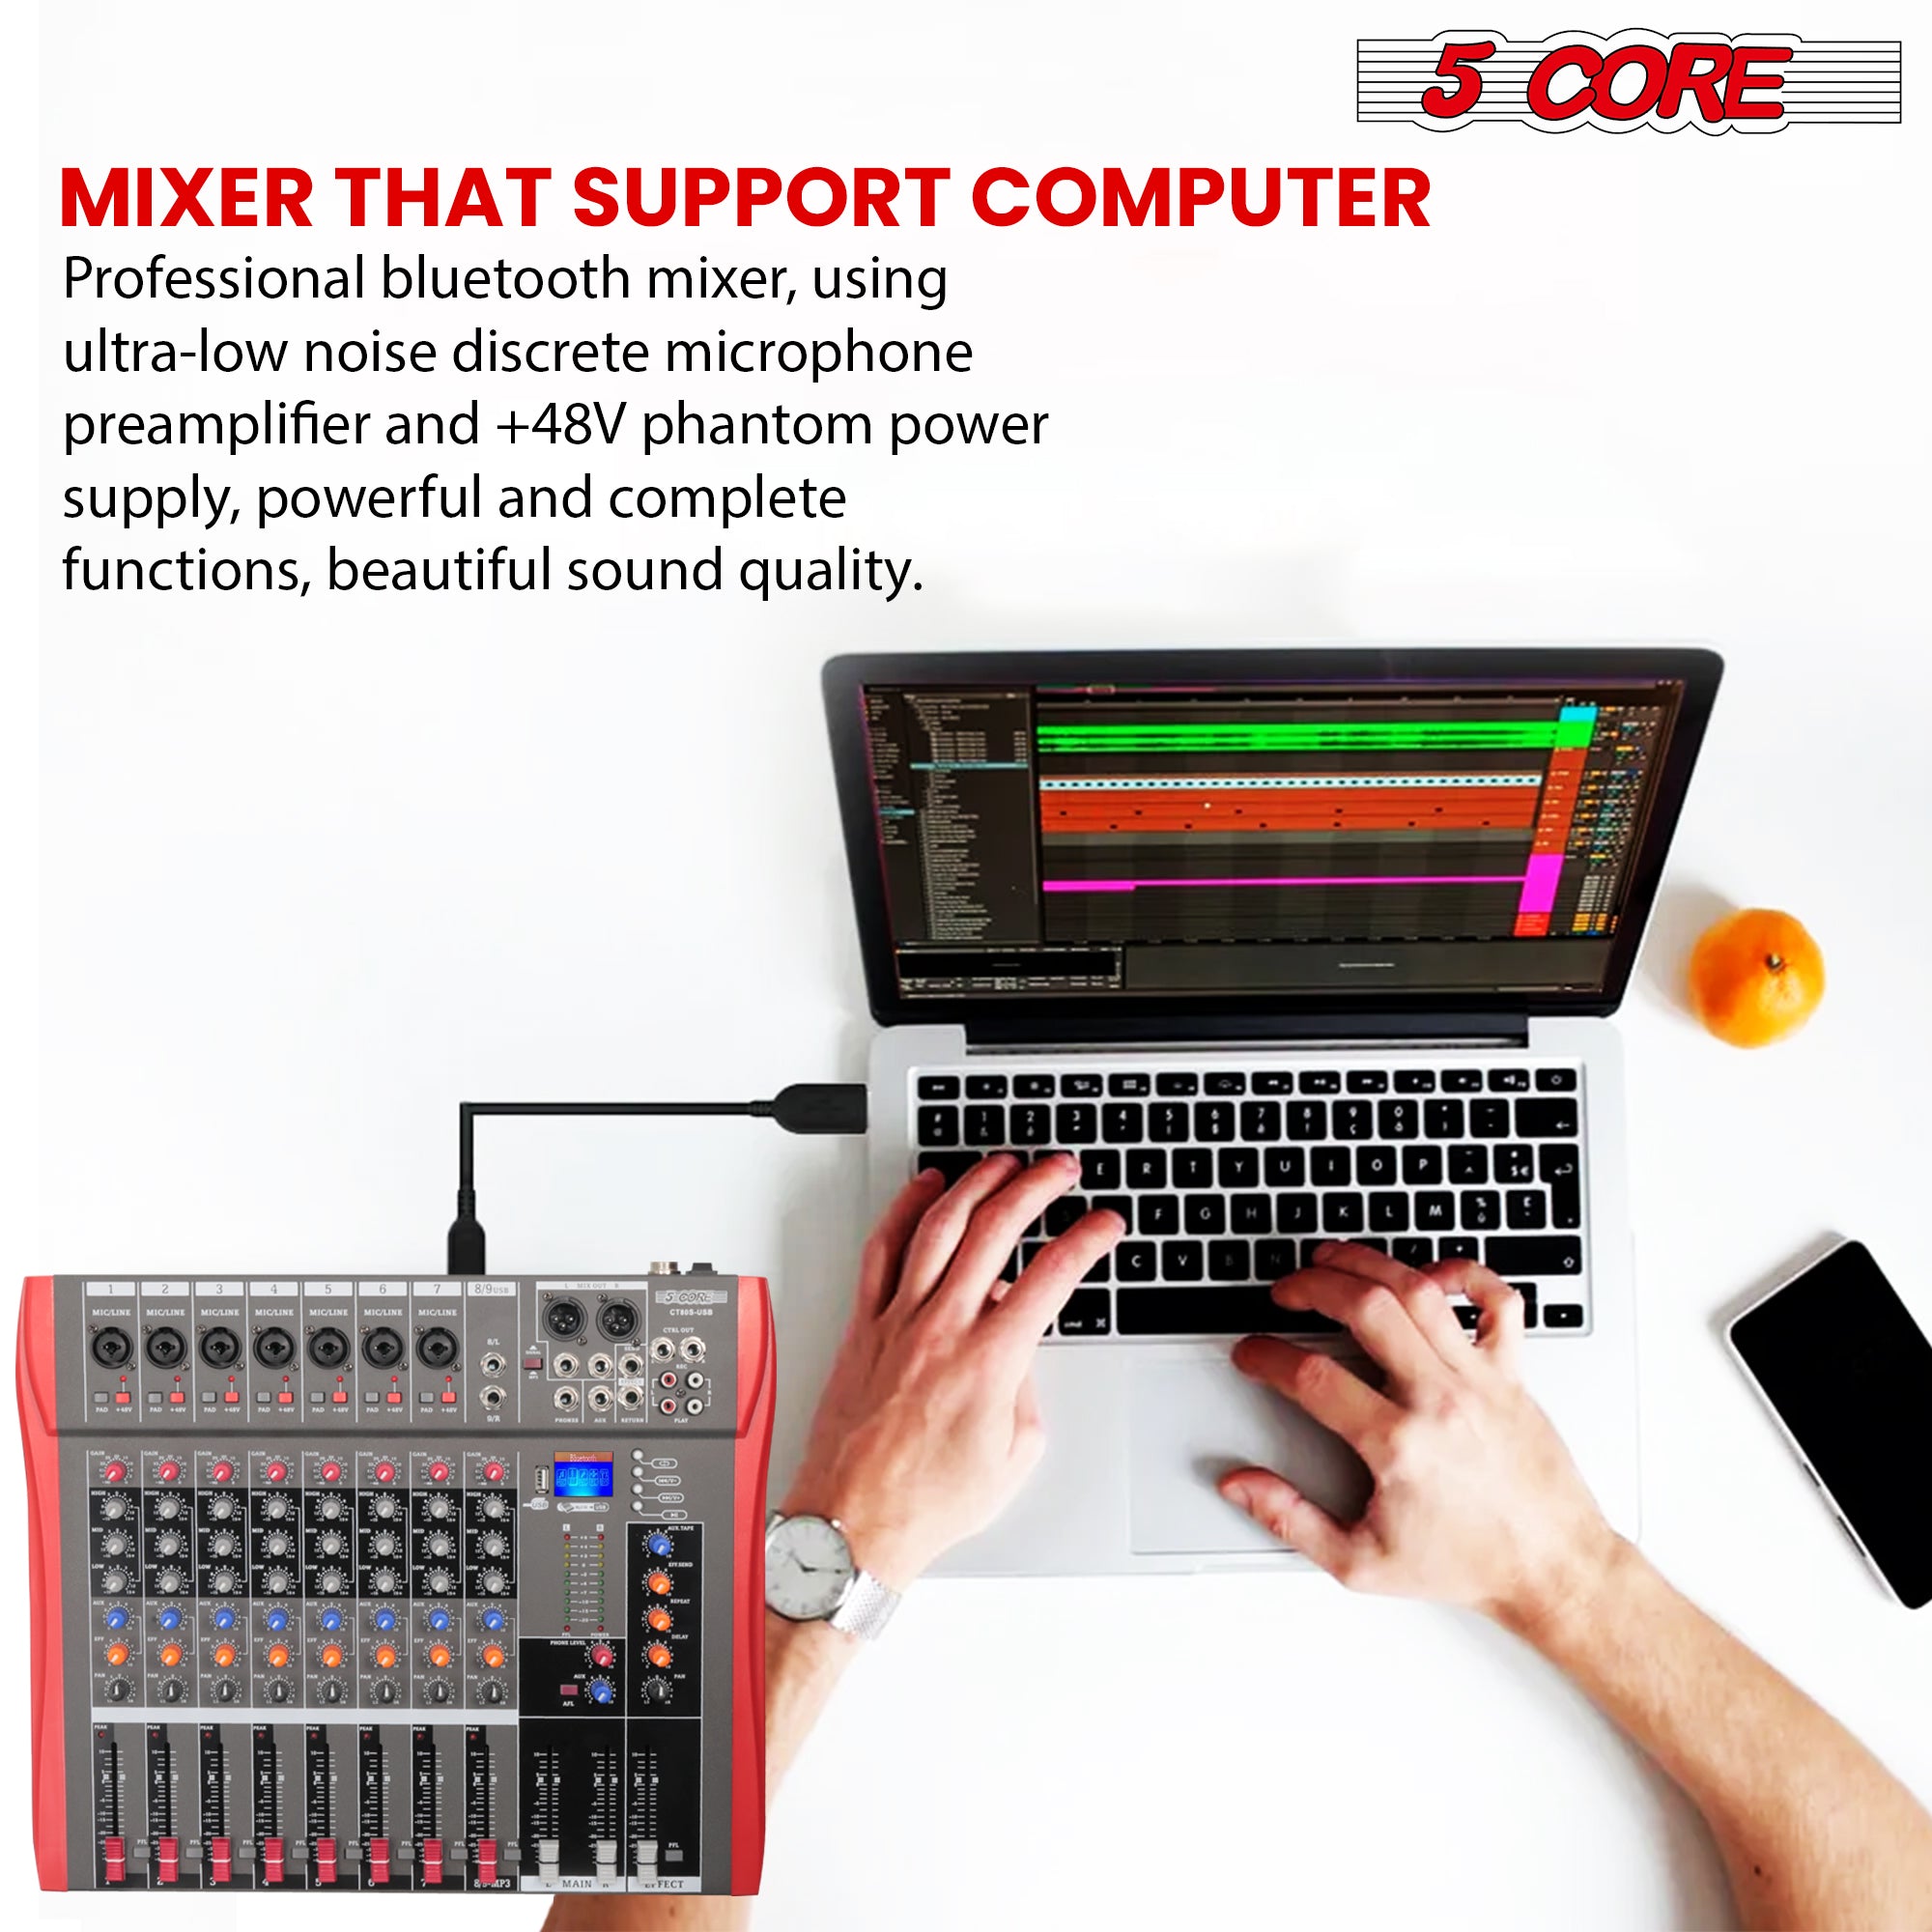 Mixer that support computer.